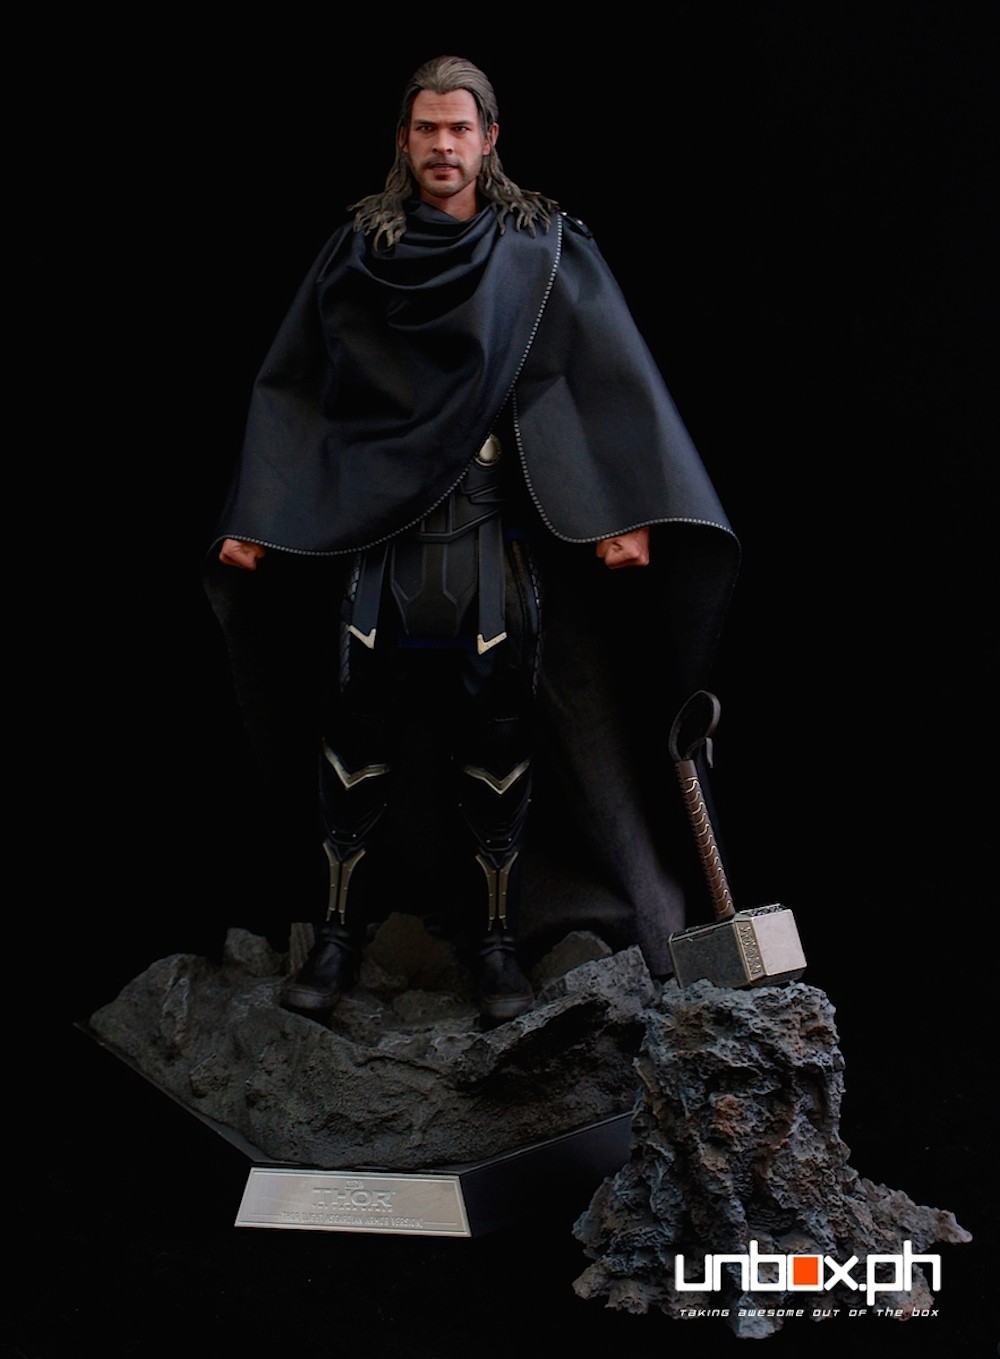 Together with the hammer and rock from the first Thor figure.